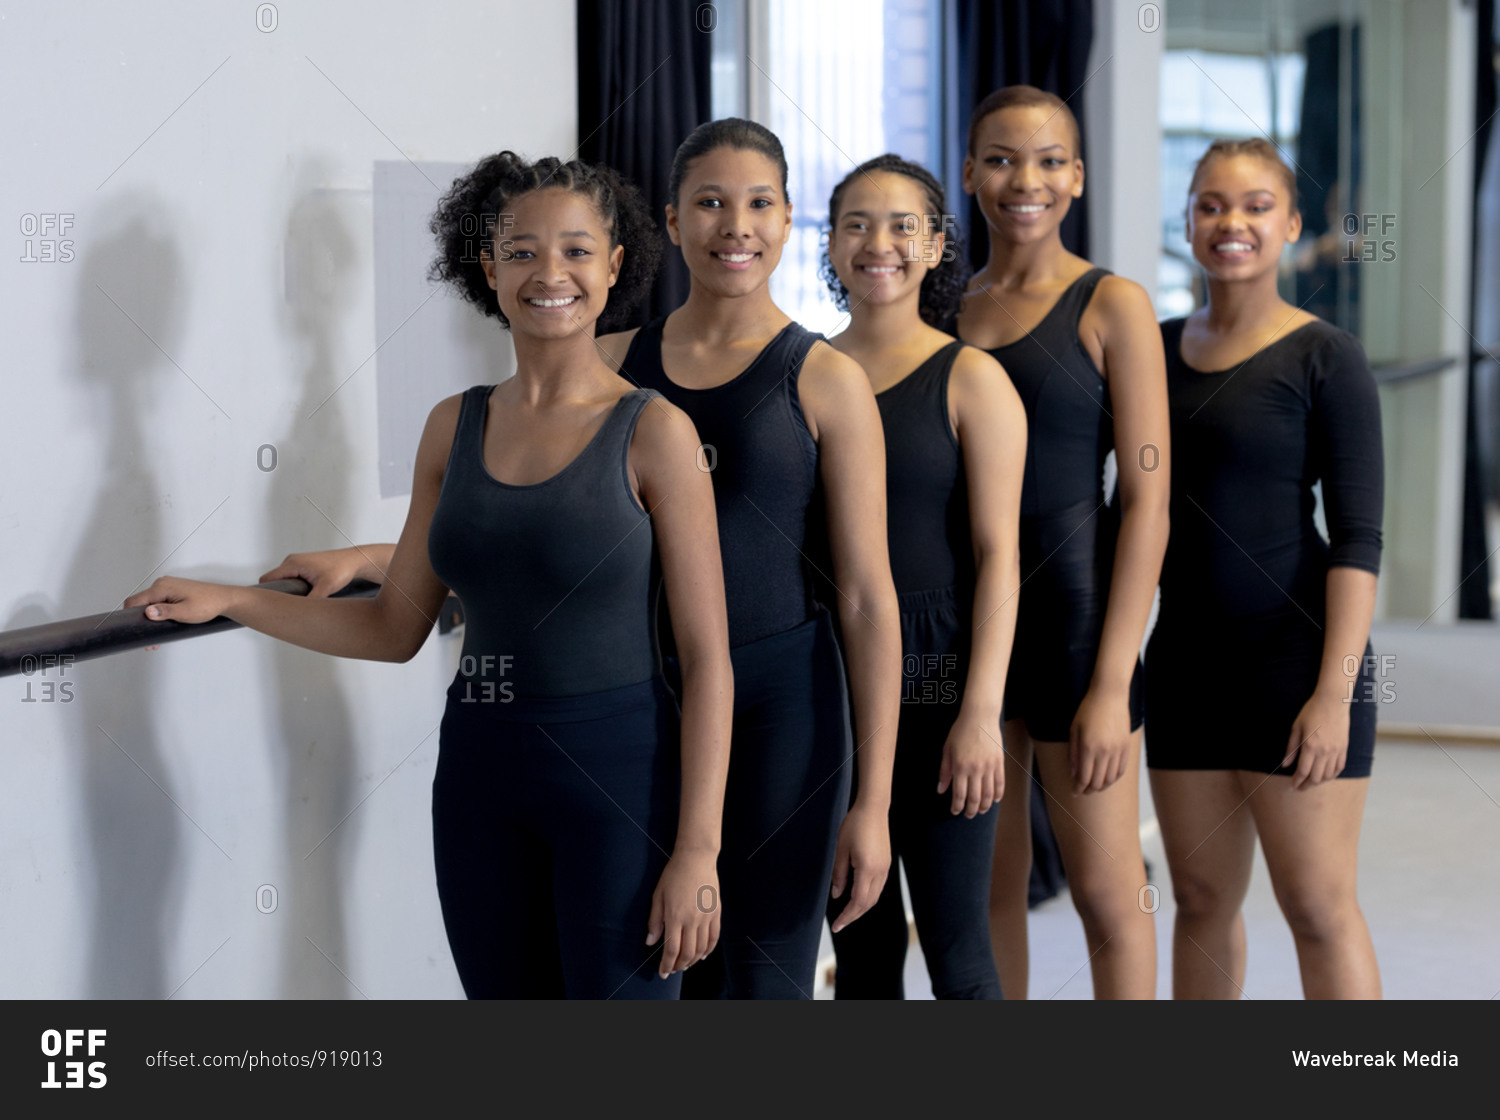 Front view of a multi-ethnic group of fit female modern dancers wearing black outfits practicing a dance routine during a dance class in a bright studio, standing by a handrail, smiling and looking straight into a camera.